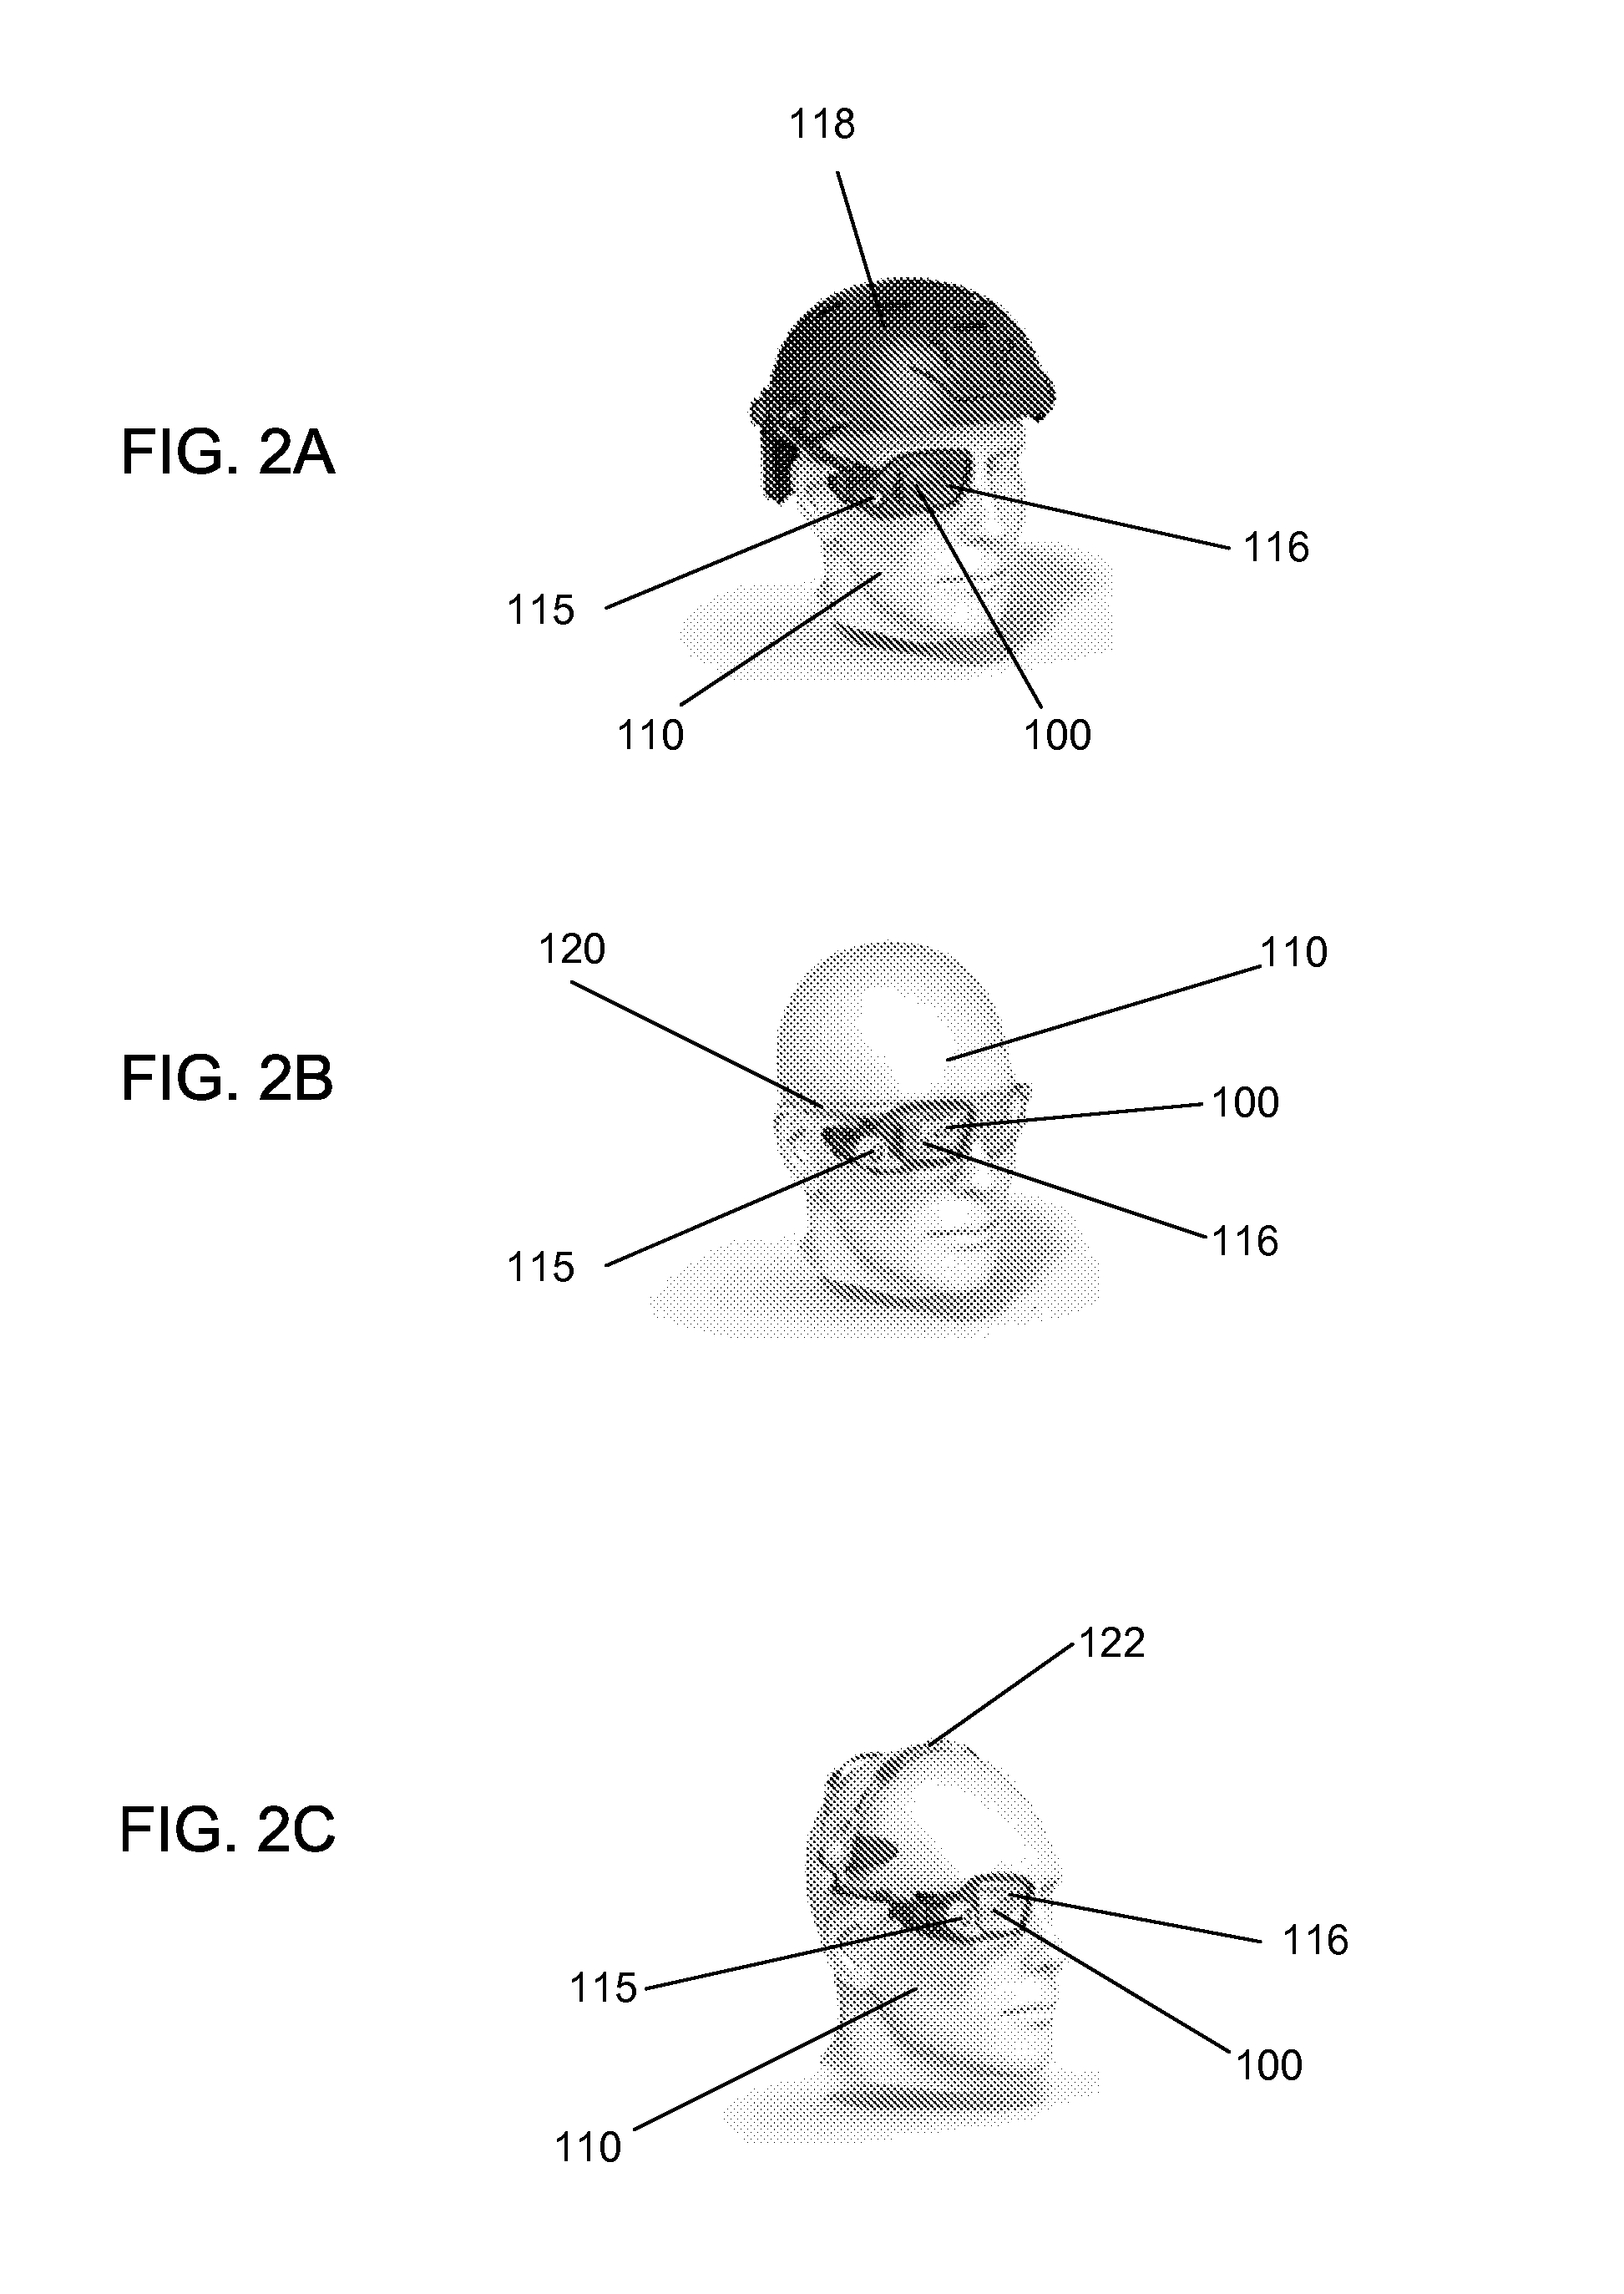 Systems and methods for displaying medical images